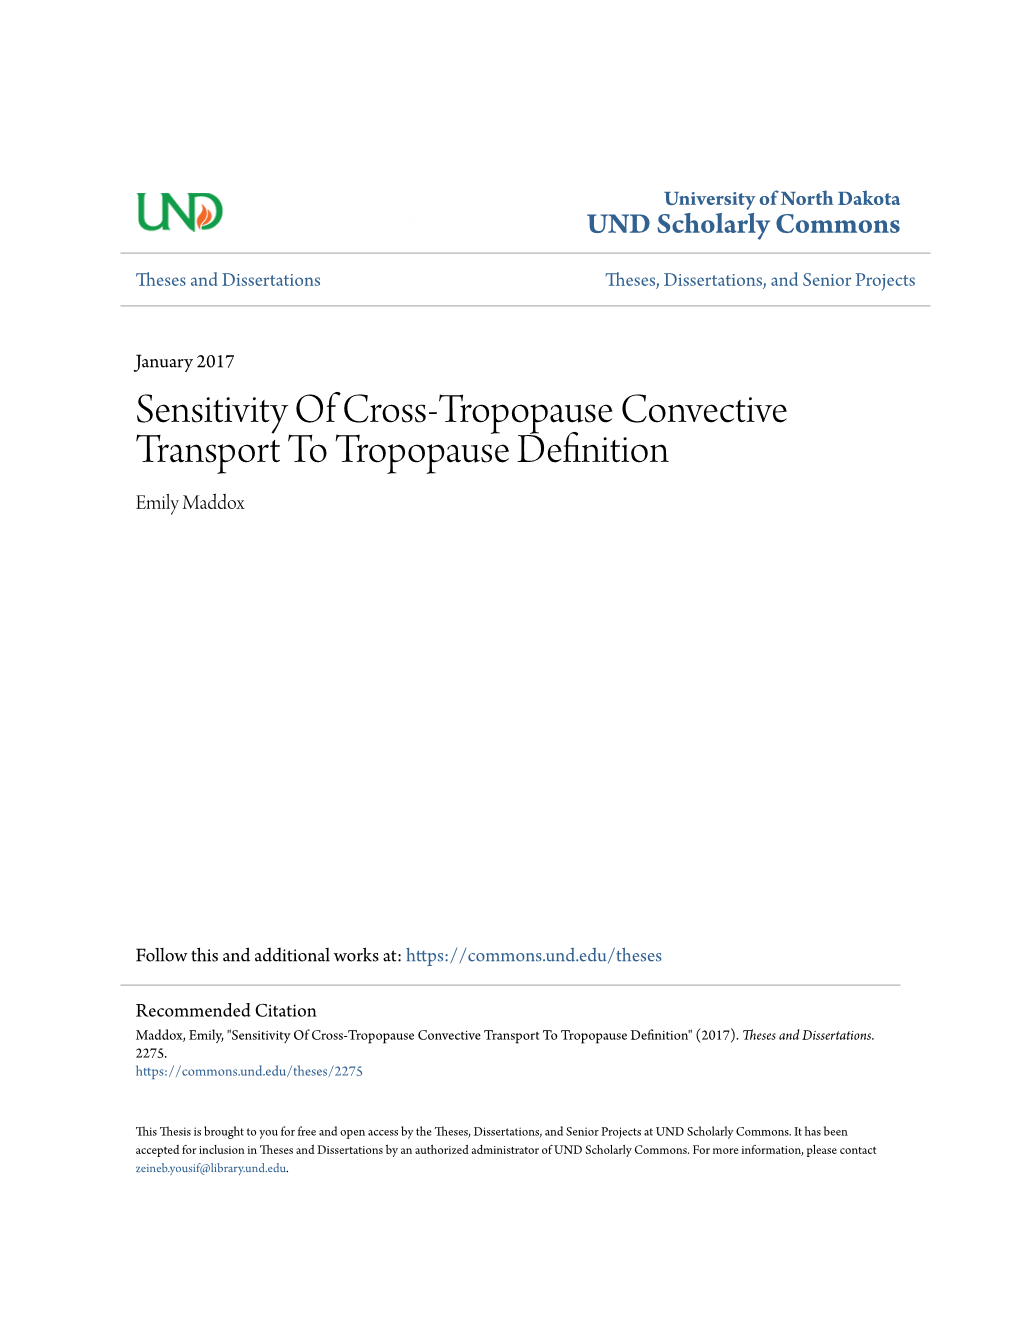 Sensitivity of Cross-Tropopause Convective Transport to Tropopause Definition Emily Maddox